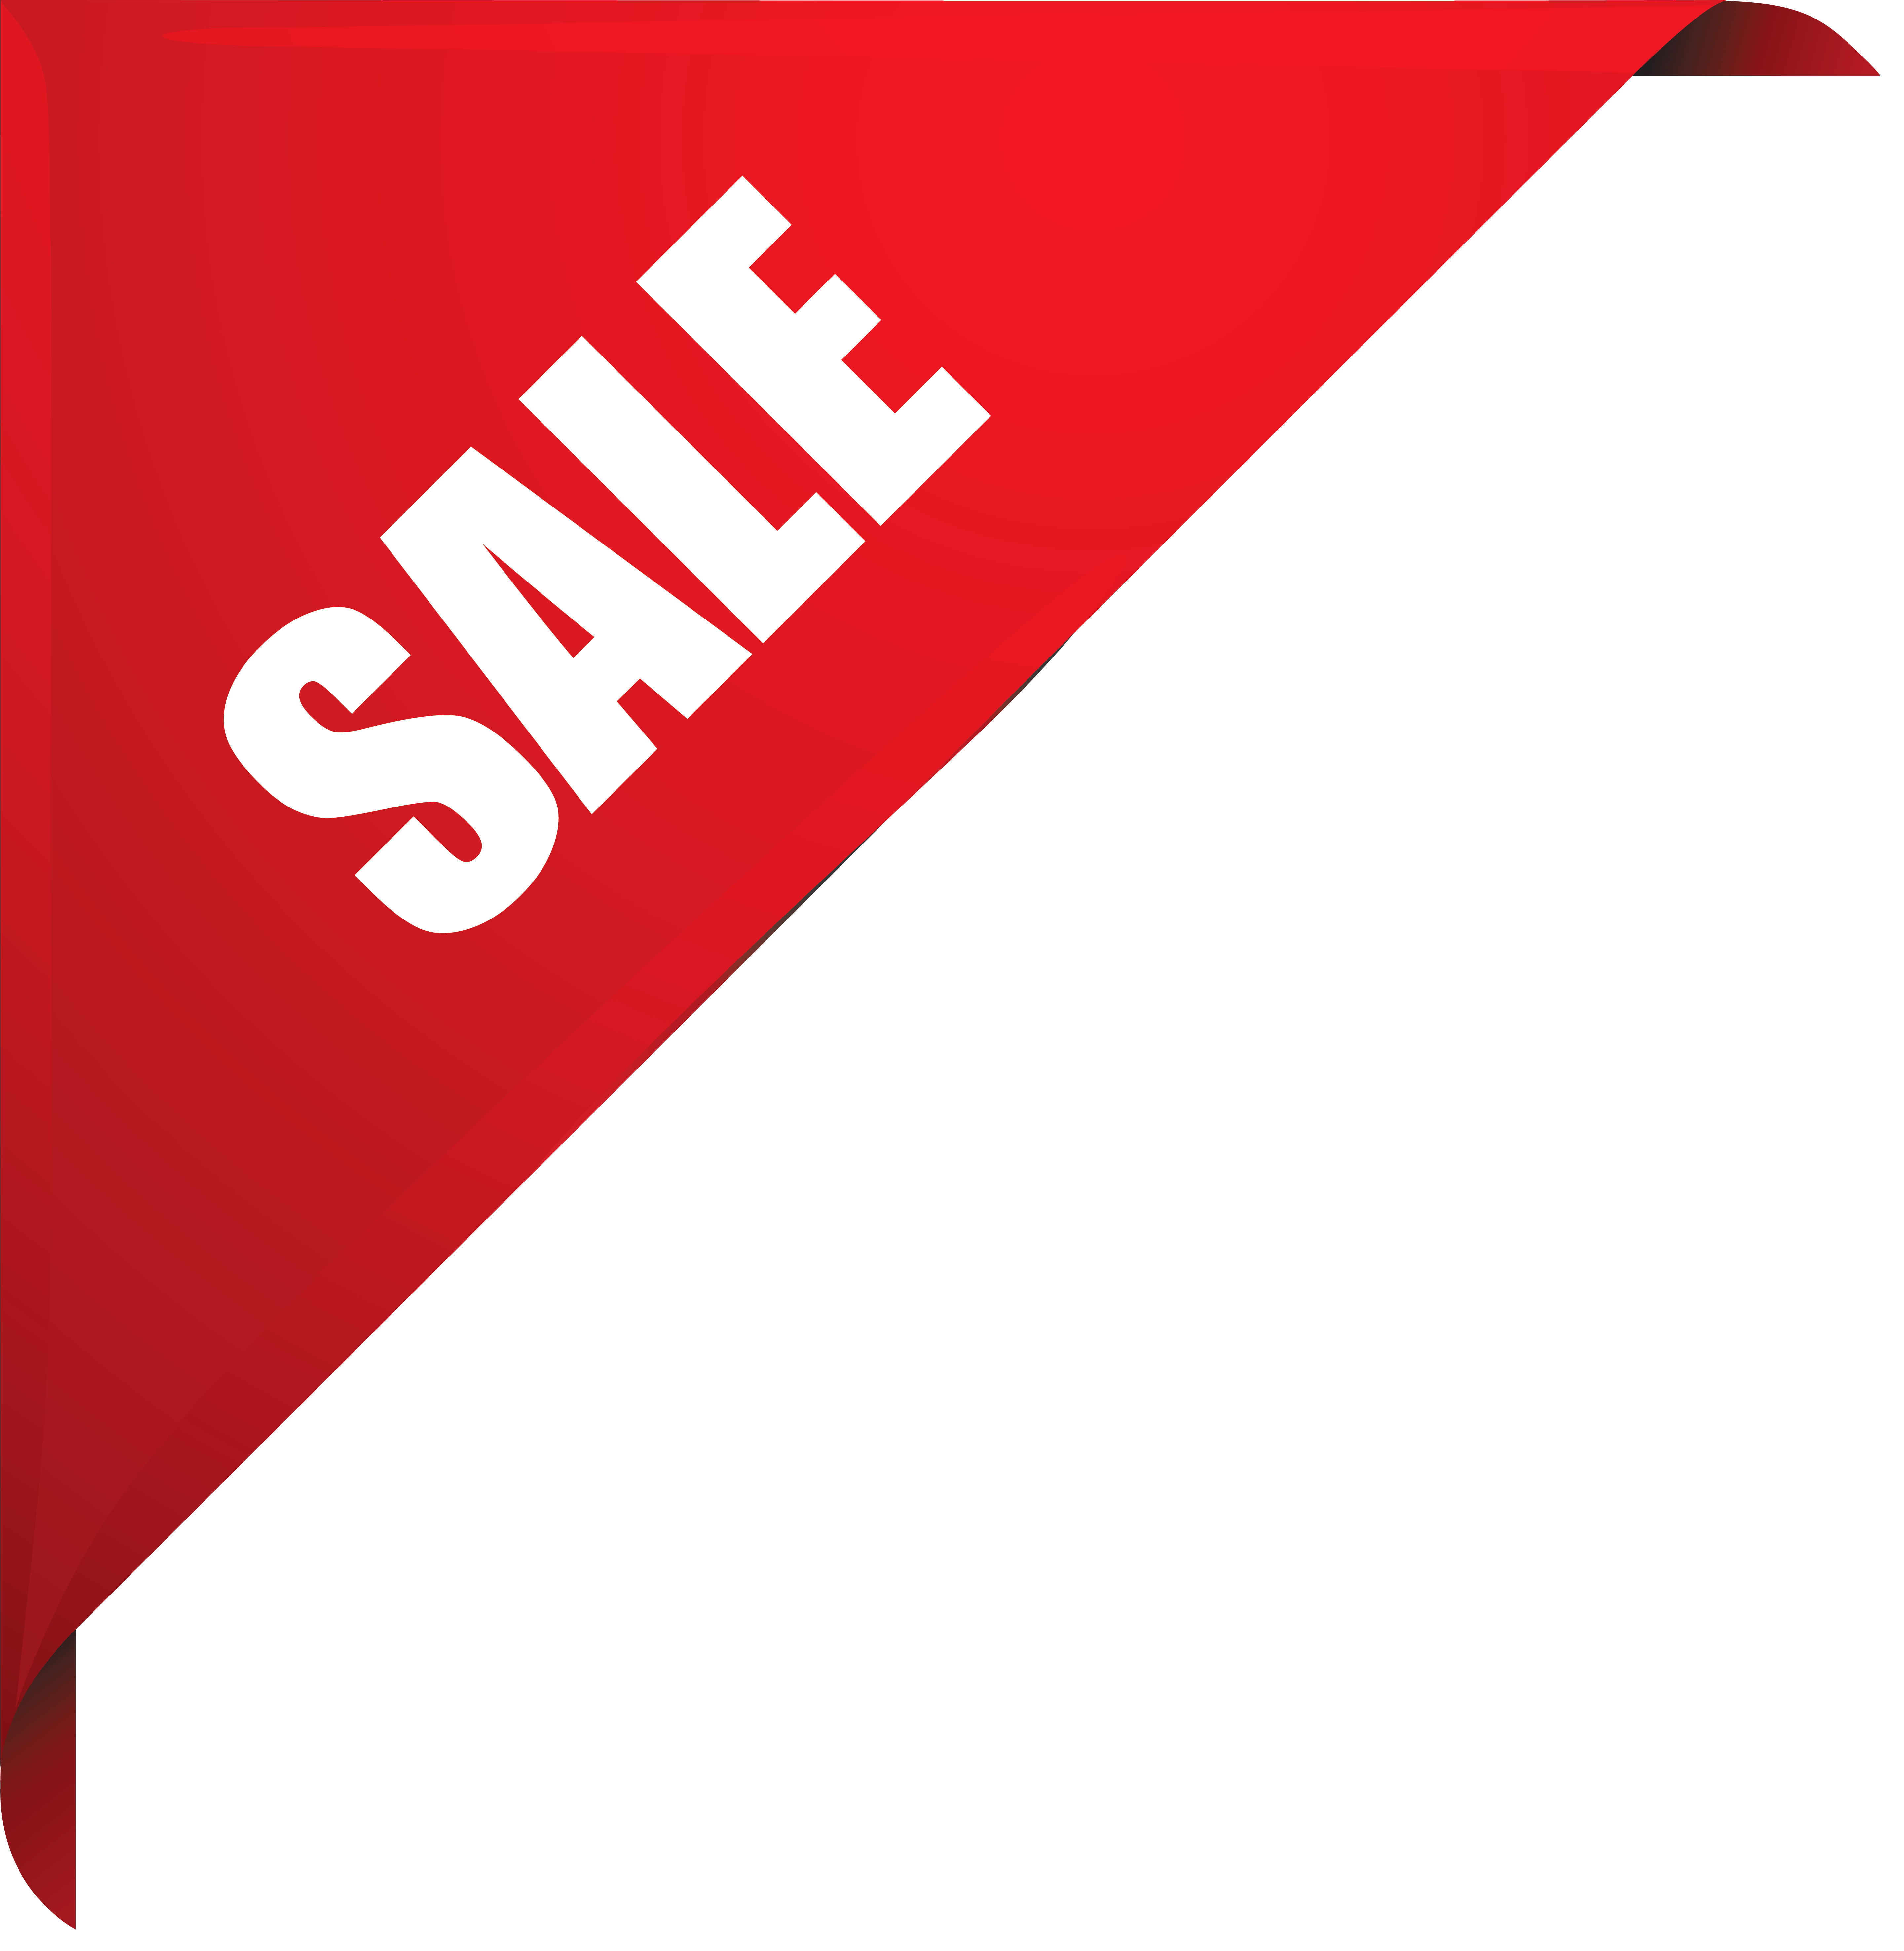 Sale Png Icon #288092. 